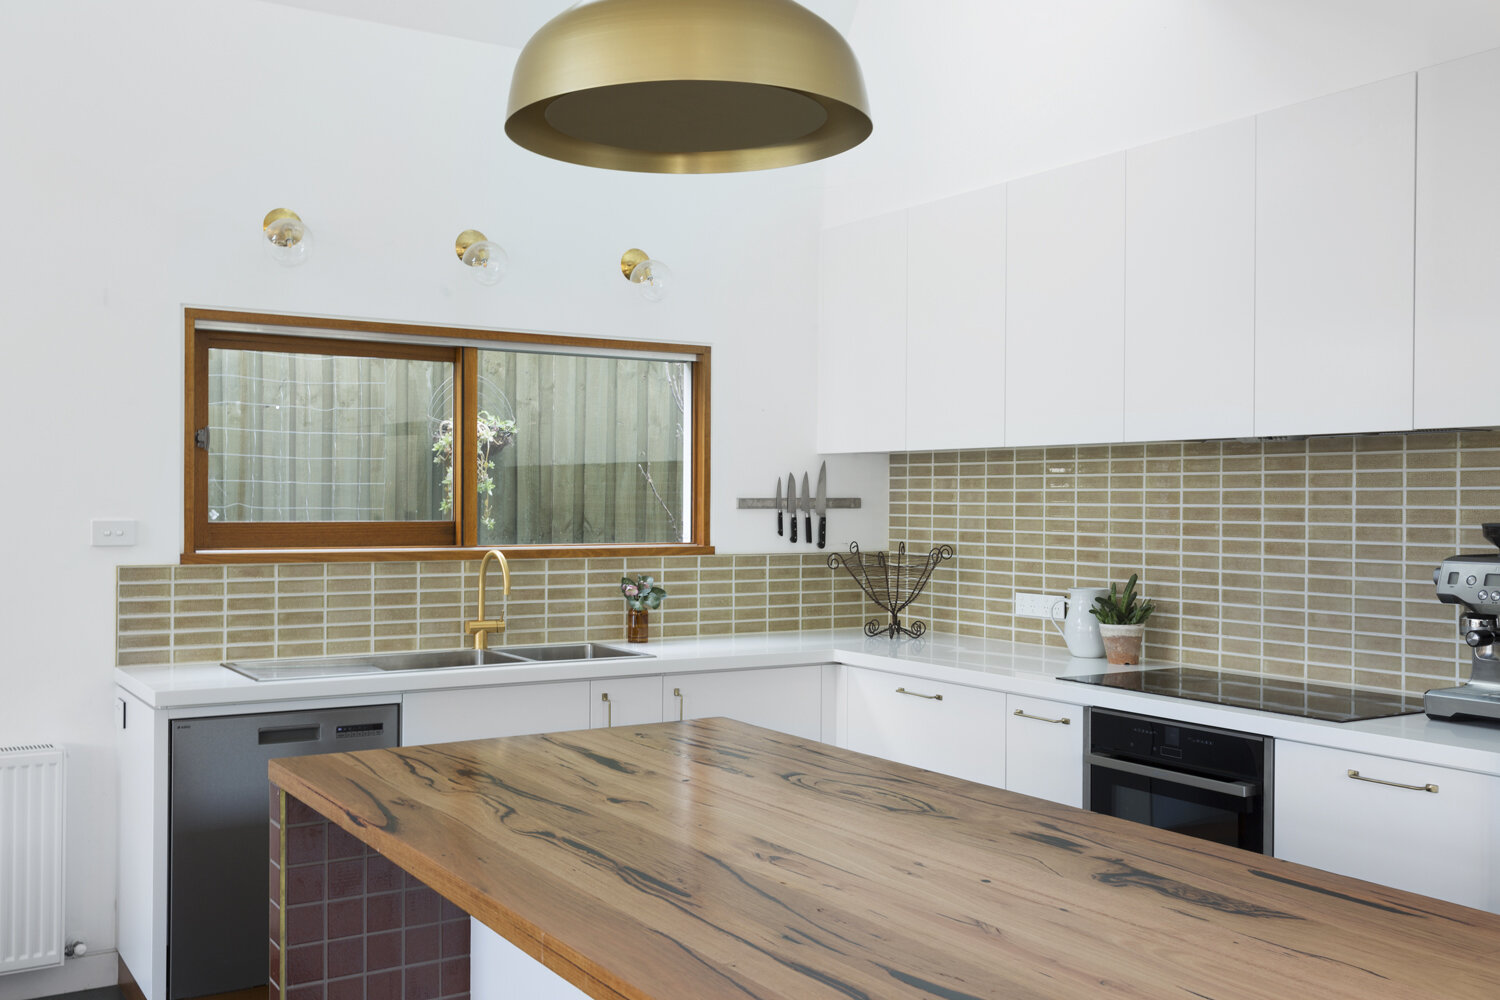 New kitchen design in inner city Melbourne home extension and renovation